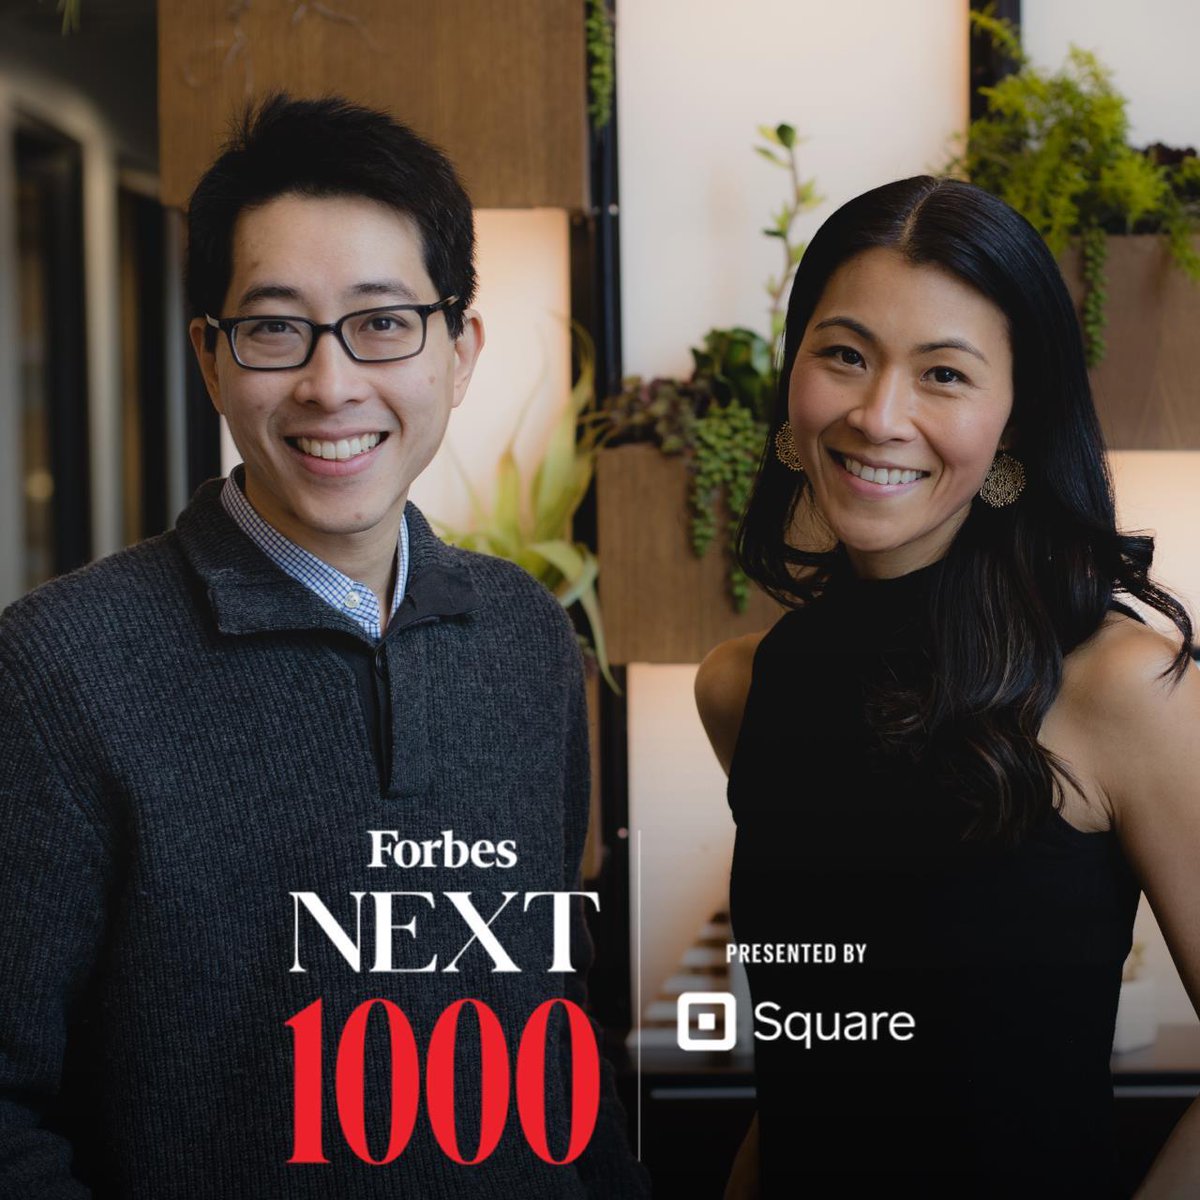 Forbes #Next1000 recognizes entrepreneurs who are redefining what it means to build a business today. We're SO proud to have @JessicaNamKim & @sclee_88 join this year's list, well-deserved for the hard work they do to bring our mission to life forbes.com/next1000/